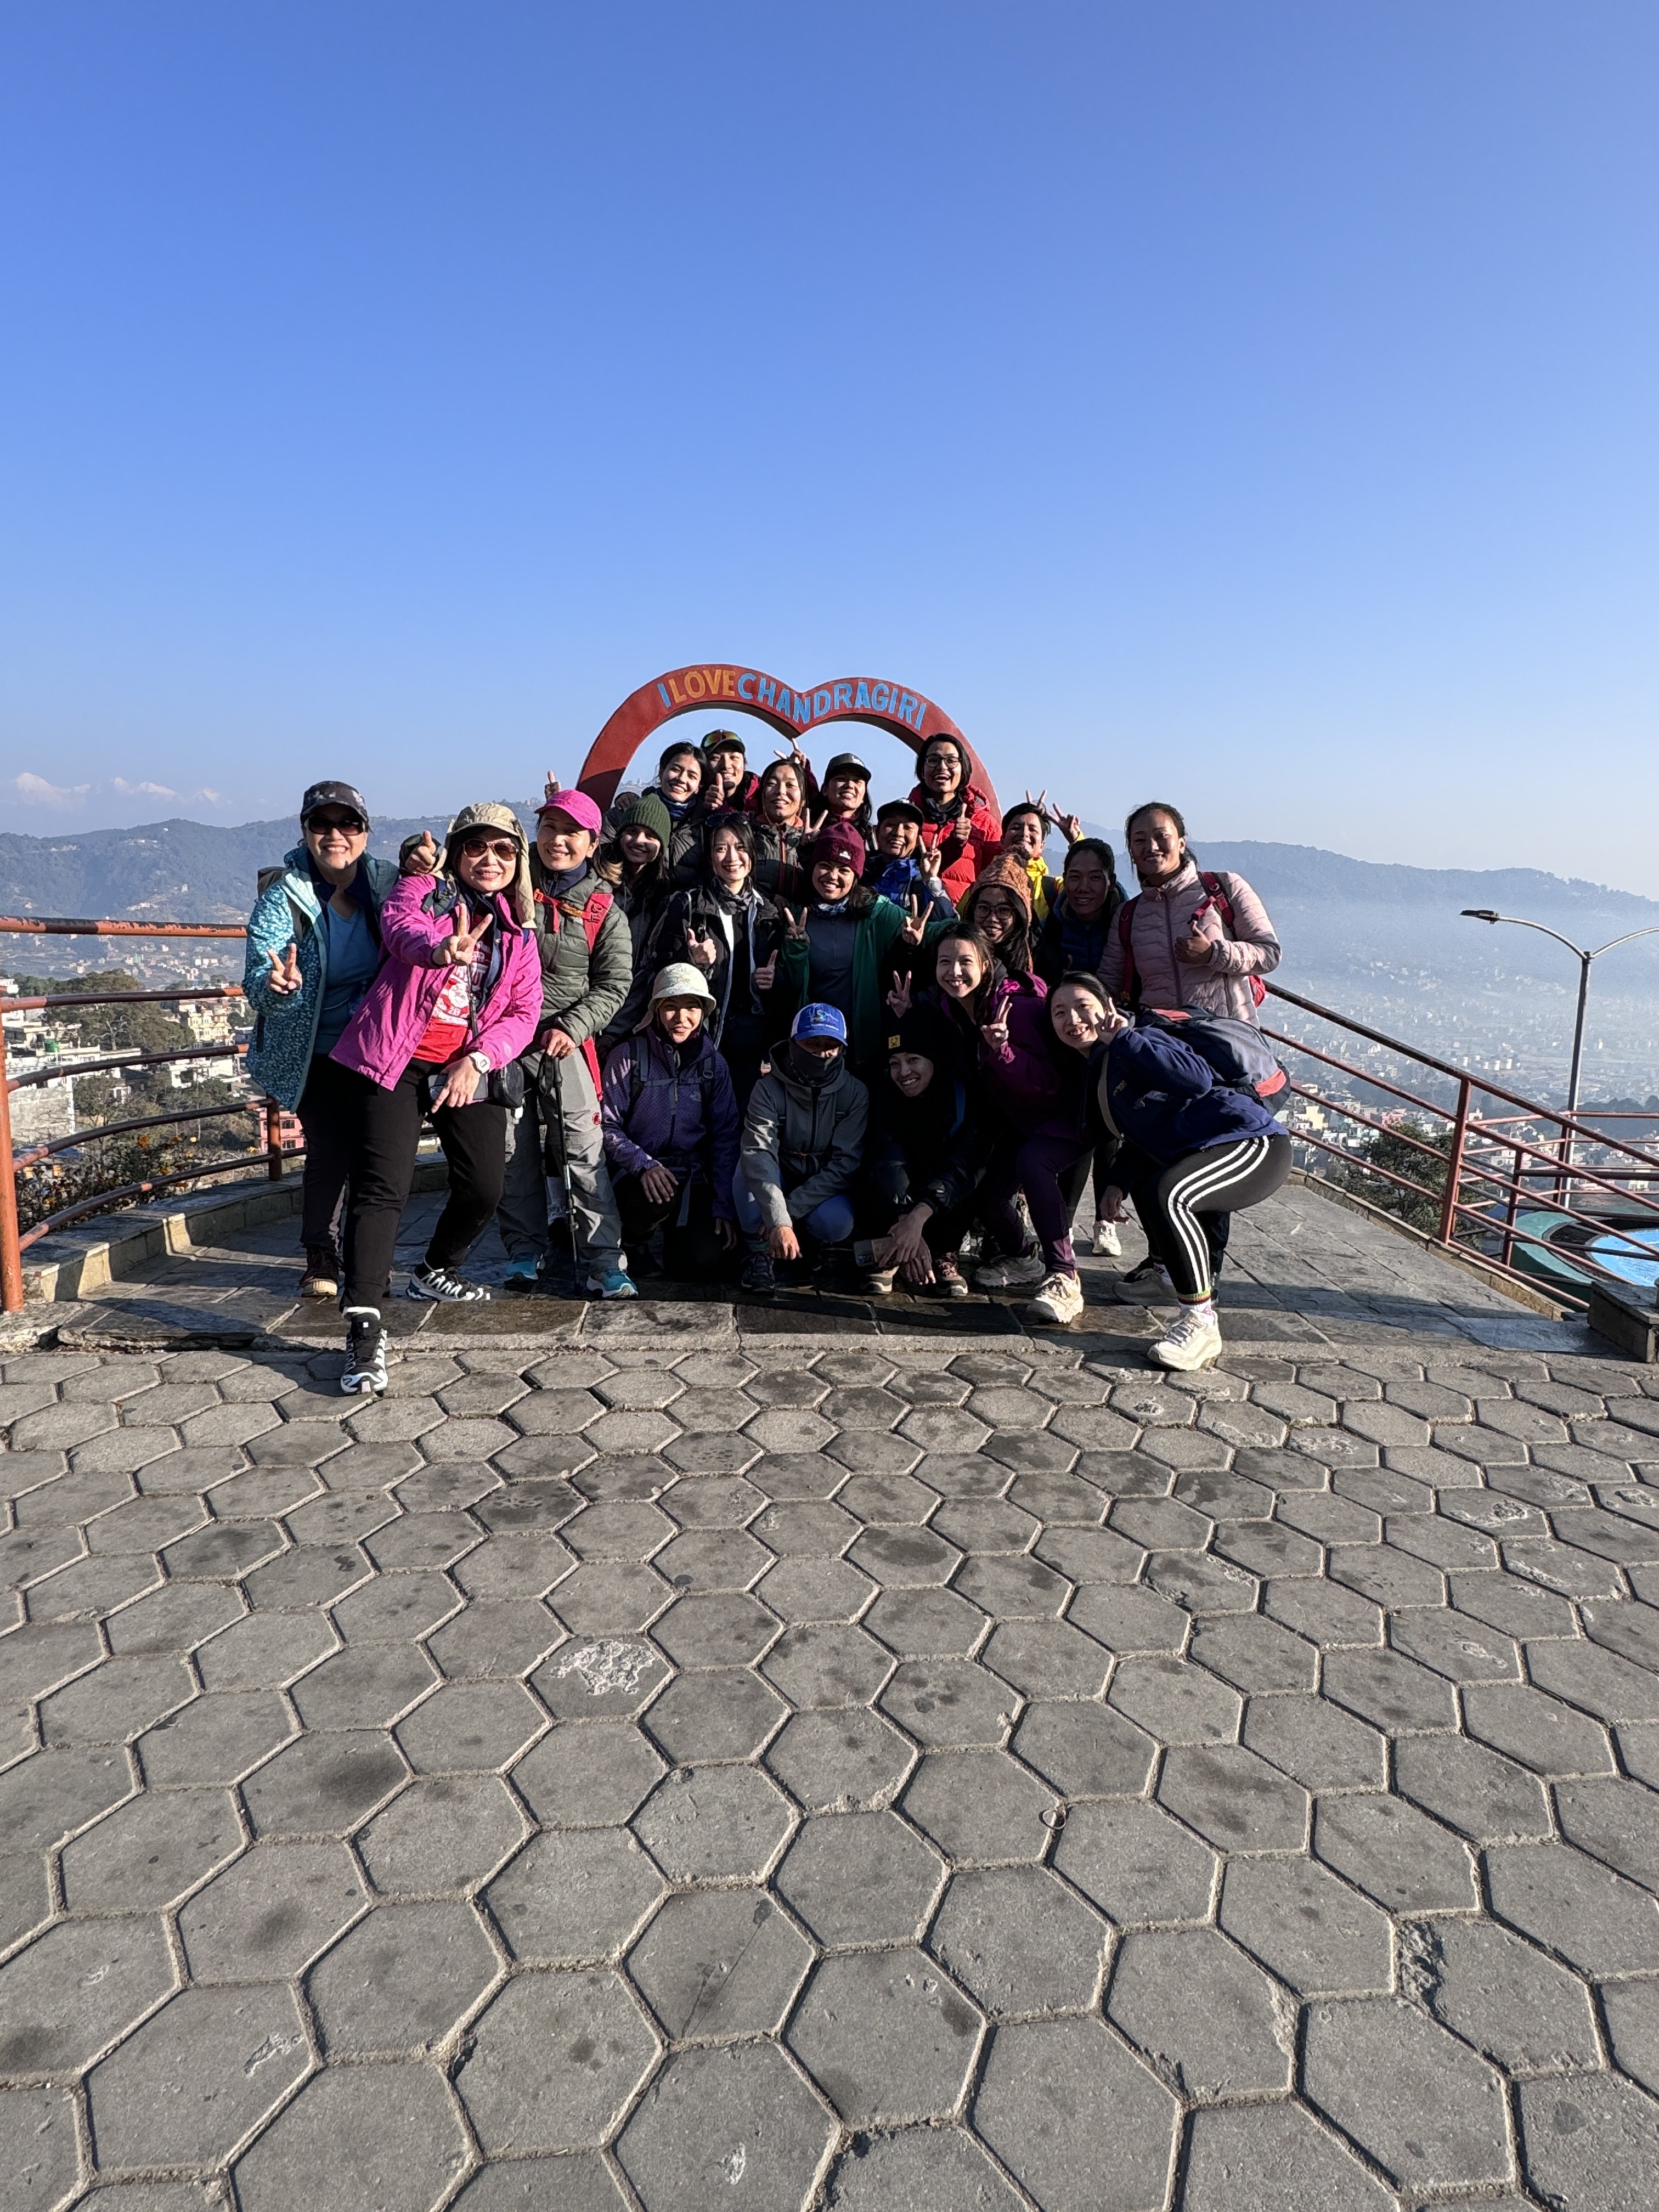 The Travel Kind volunteers hiked in Nepal from Chandragiri Hill to Hattiban with the young women they trained. Photo: Handout